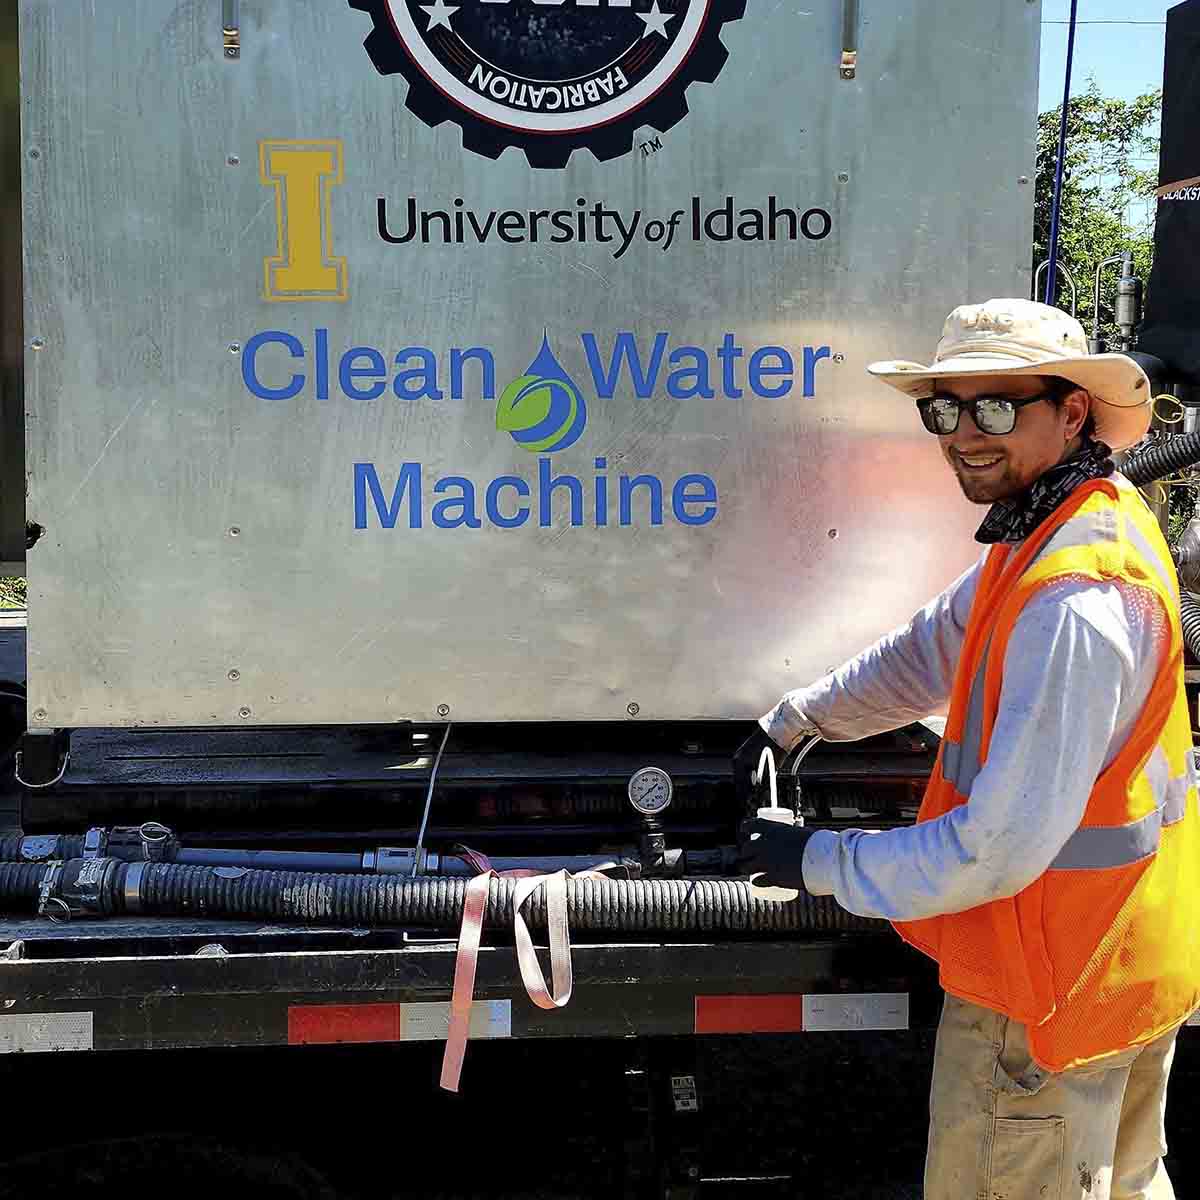 A man makes adjustments to the Clean Water Machine.